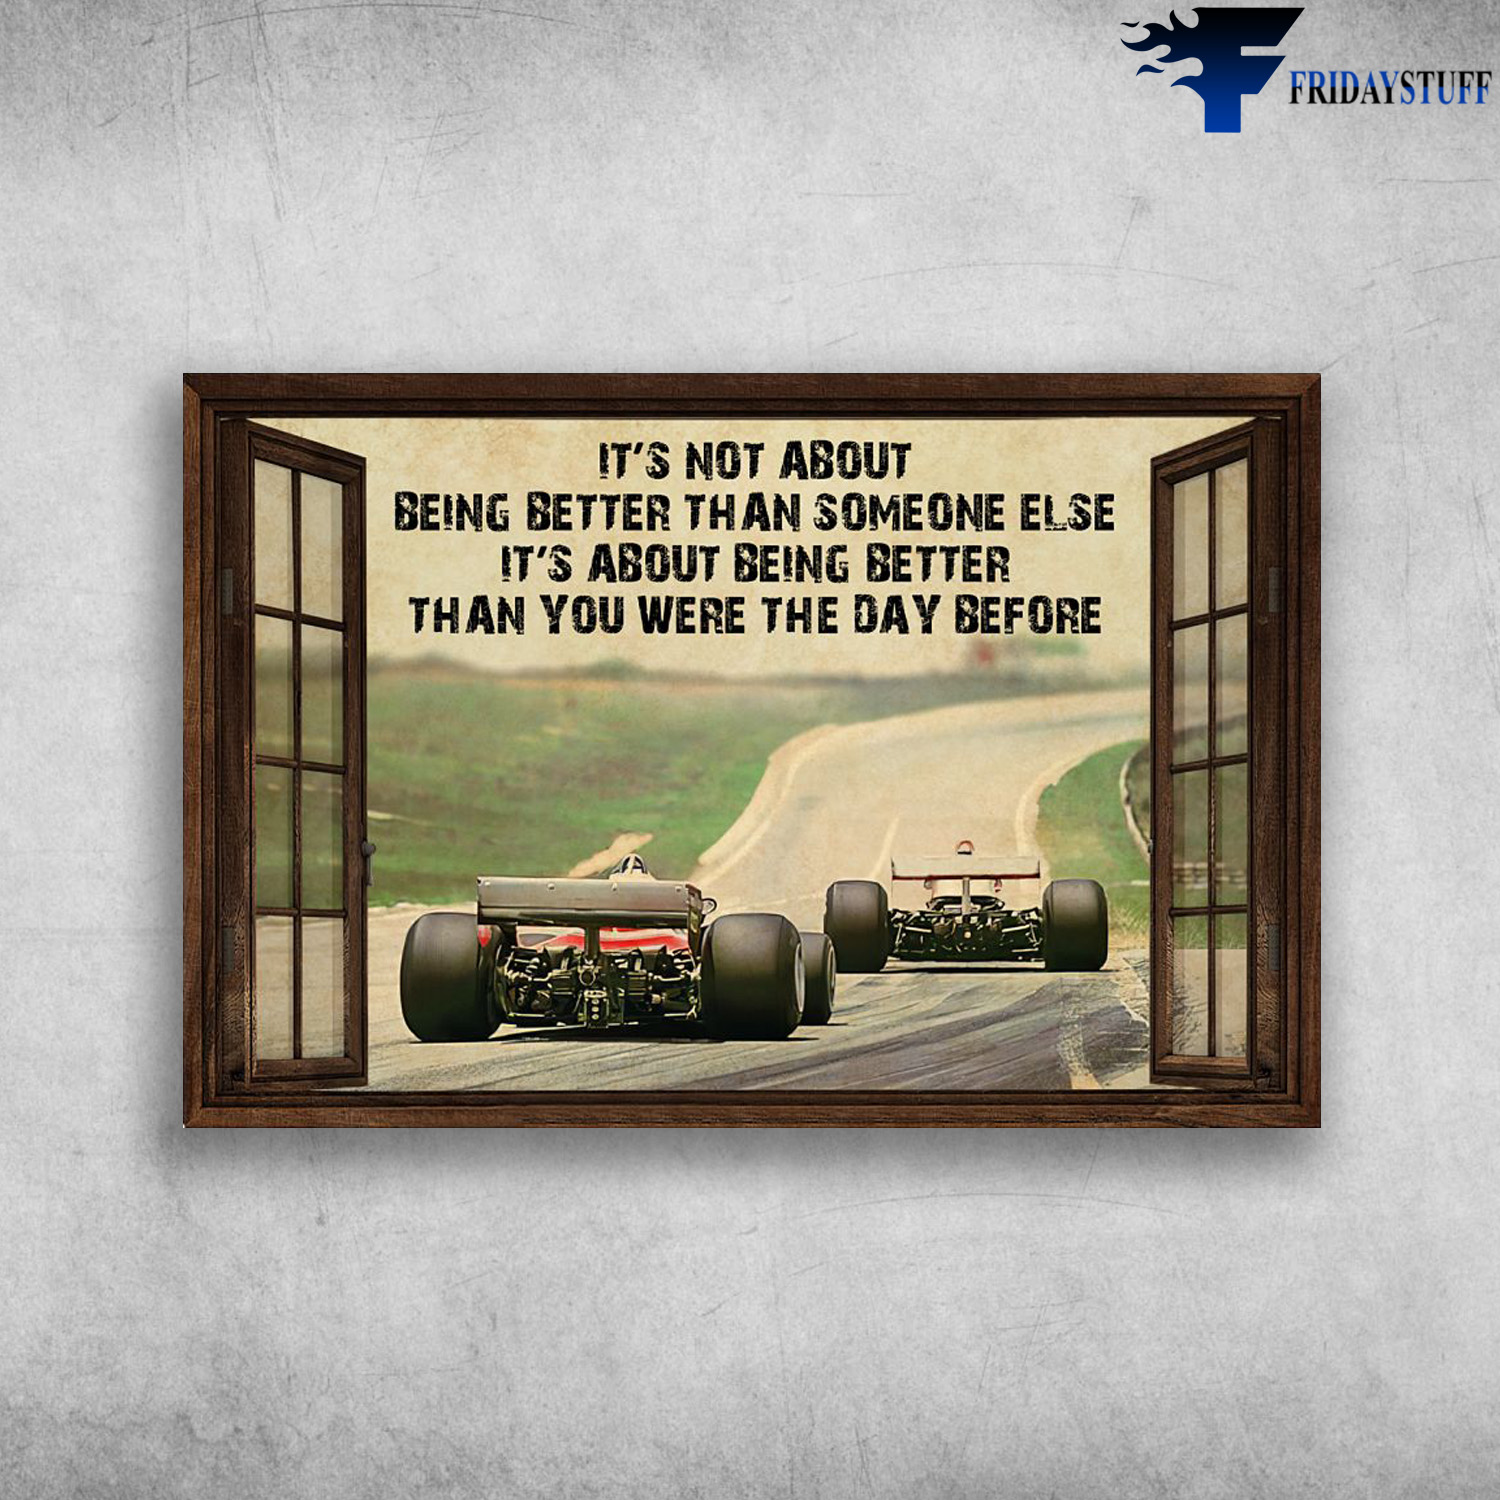 Formula 1 Outside The Window - It's Not About Being Better Than Someone Else, It's About Being Better Than You Were The Day Before